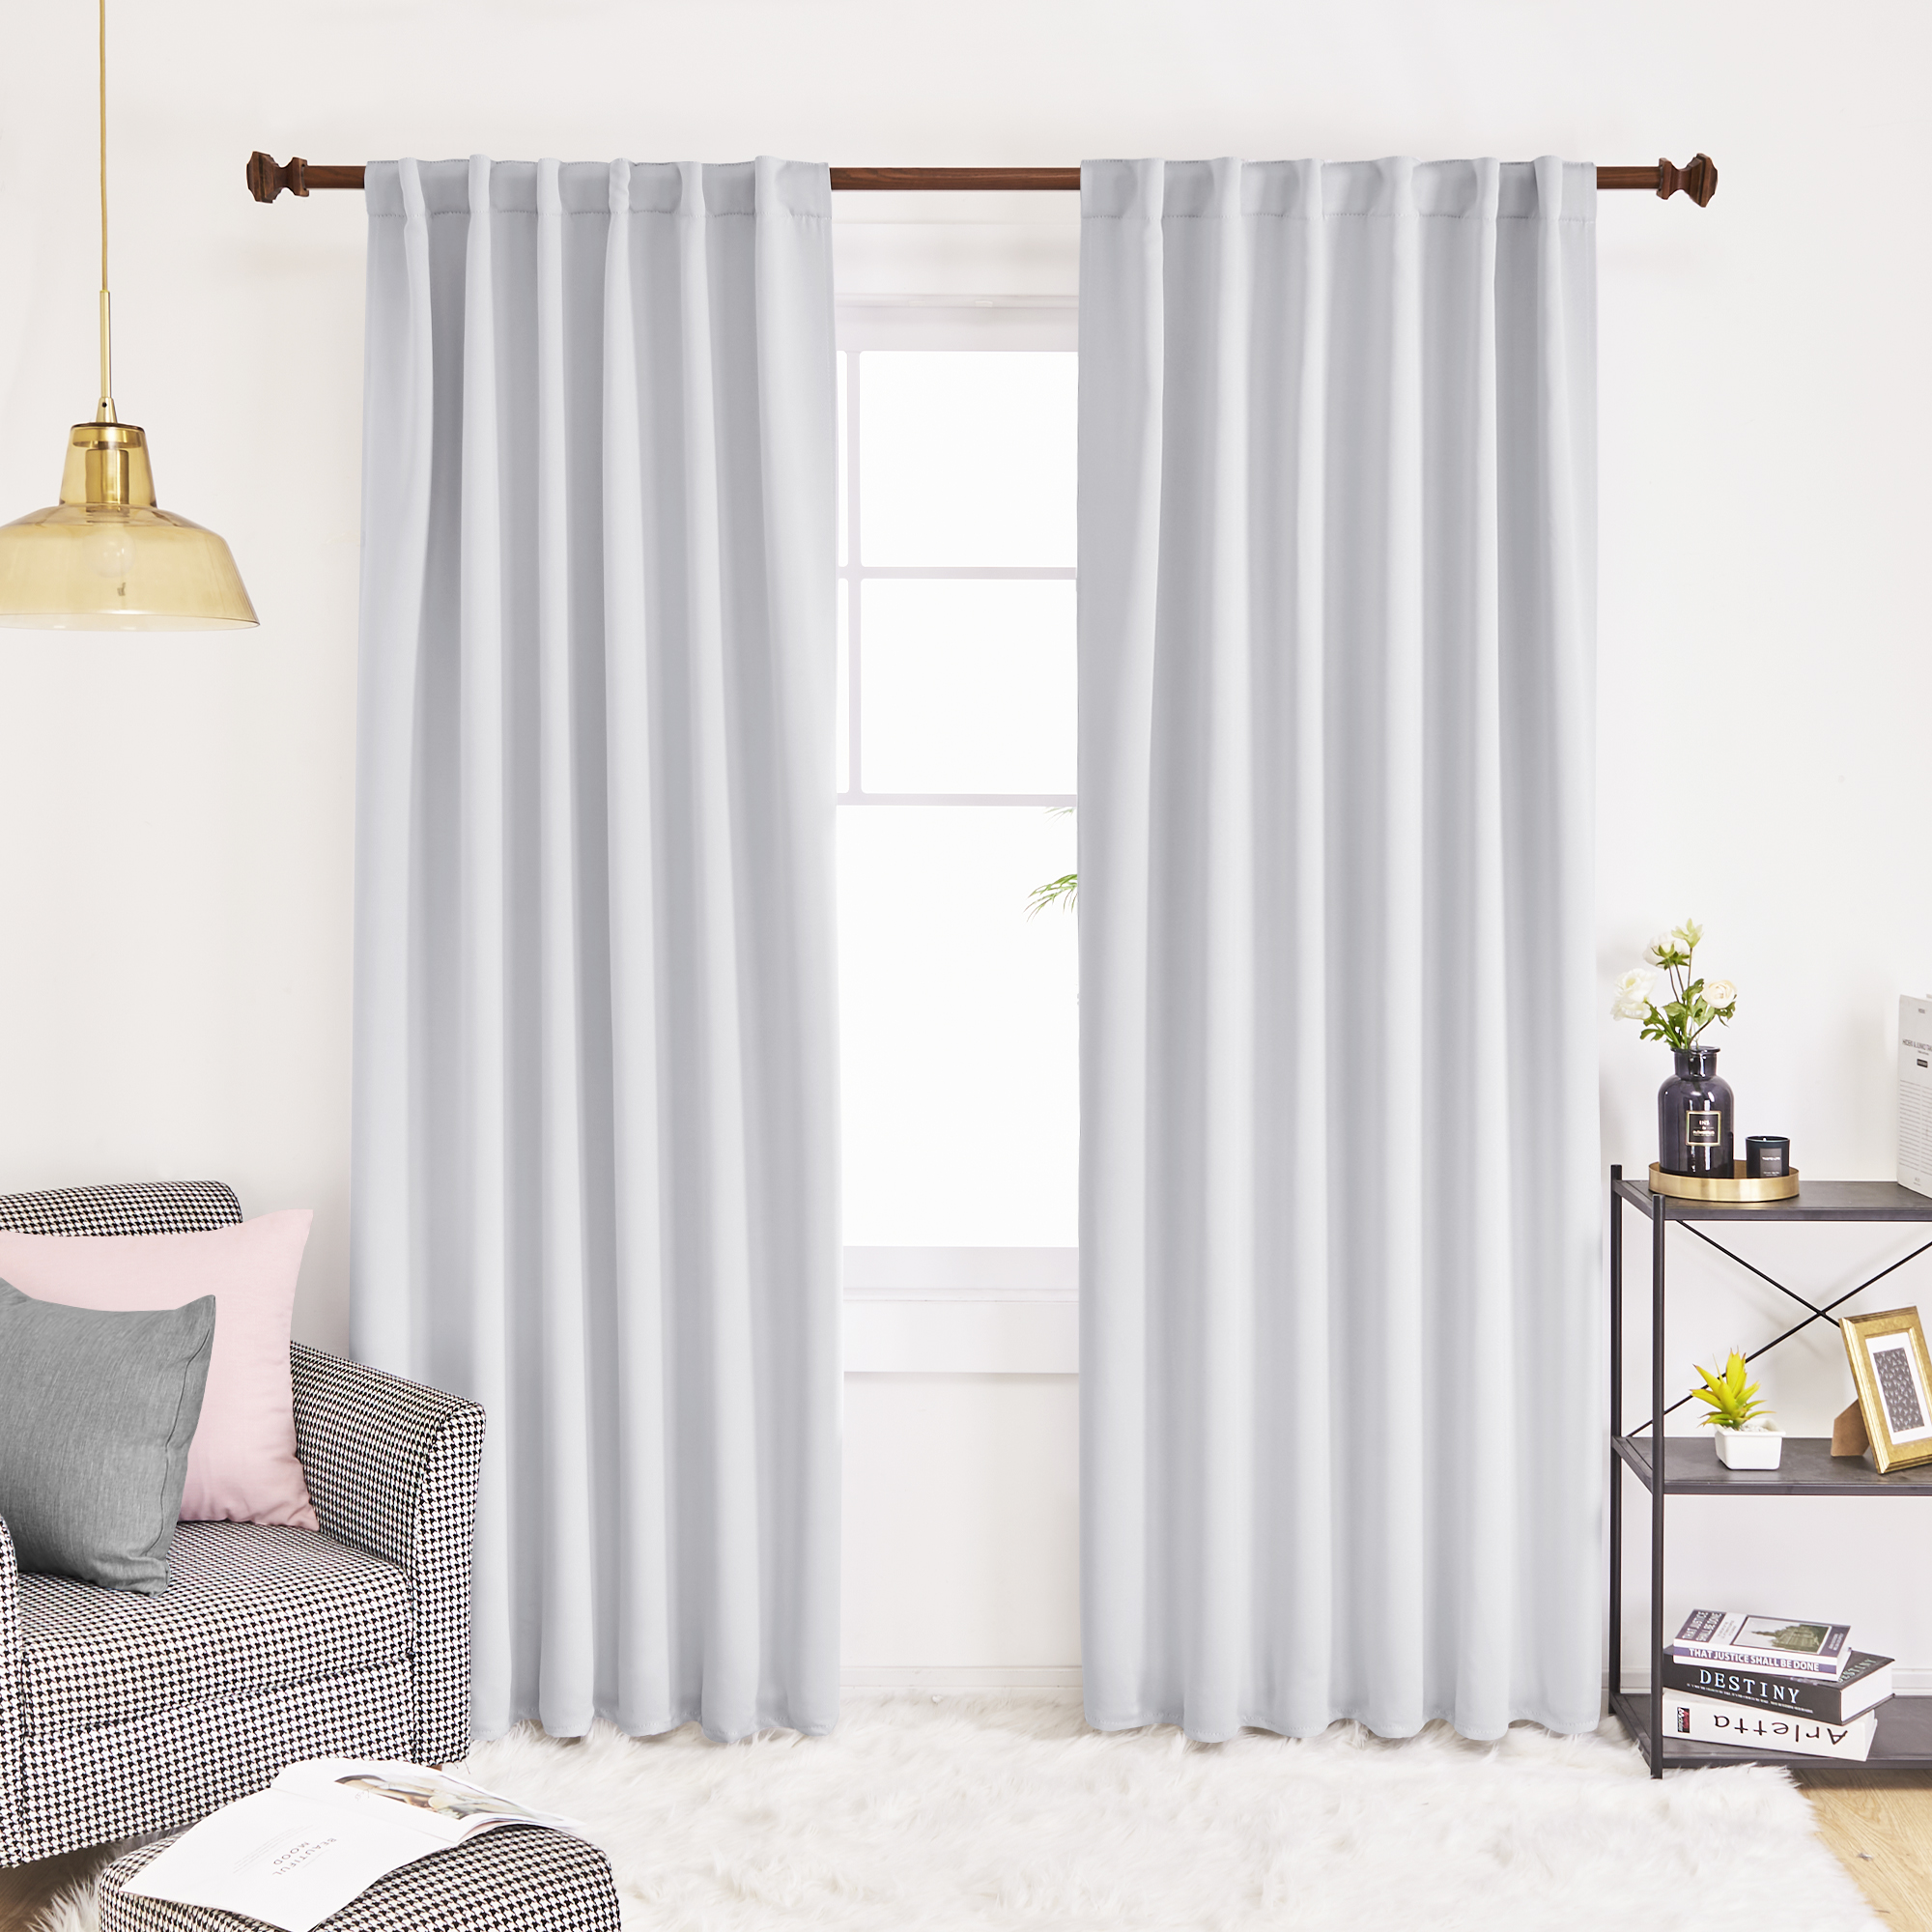 Deconovo 2 Hanging Styles Back Tab and Rod Pocket Blackout Curtains 2 Panels -$8.40~$12.80 + Free Shipping w/ Prime or orders $25+